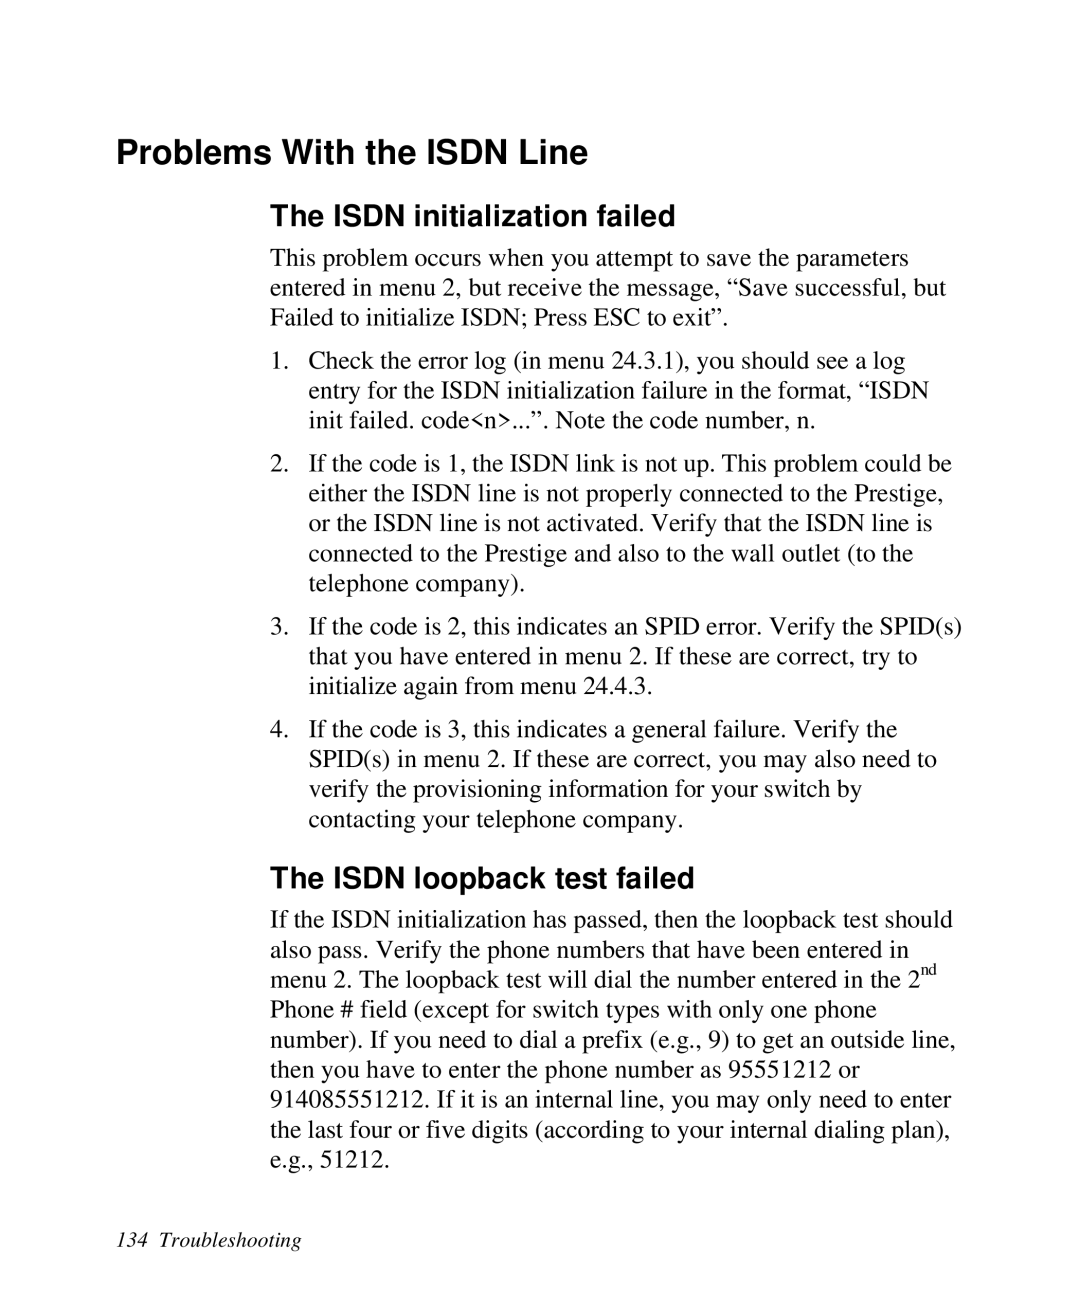 ZyXEL Communications 2864I Problems With the ISDN Line, The ISDN initialization failed, The ISDN loopback test failed 